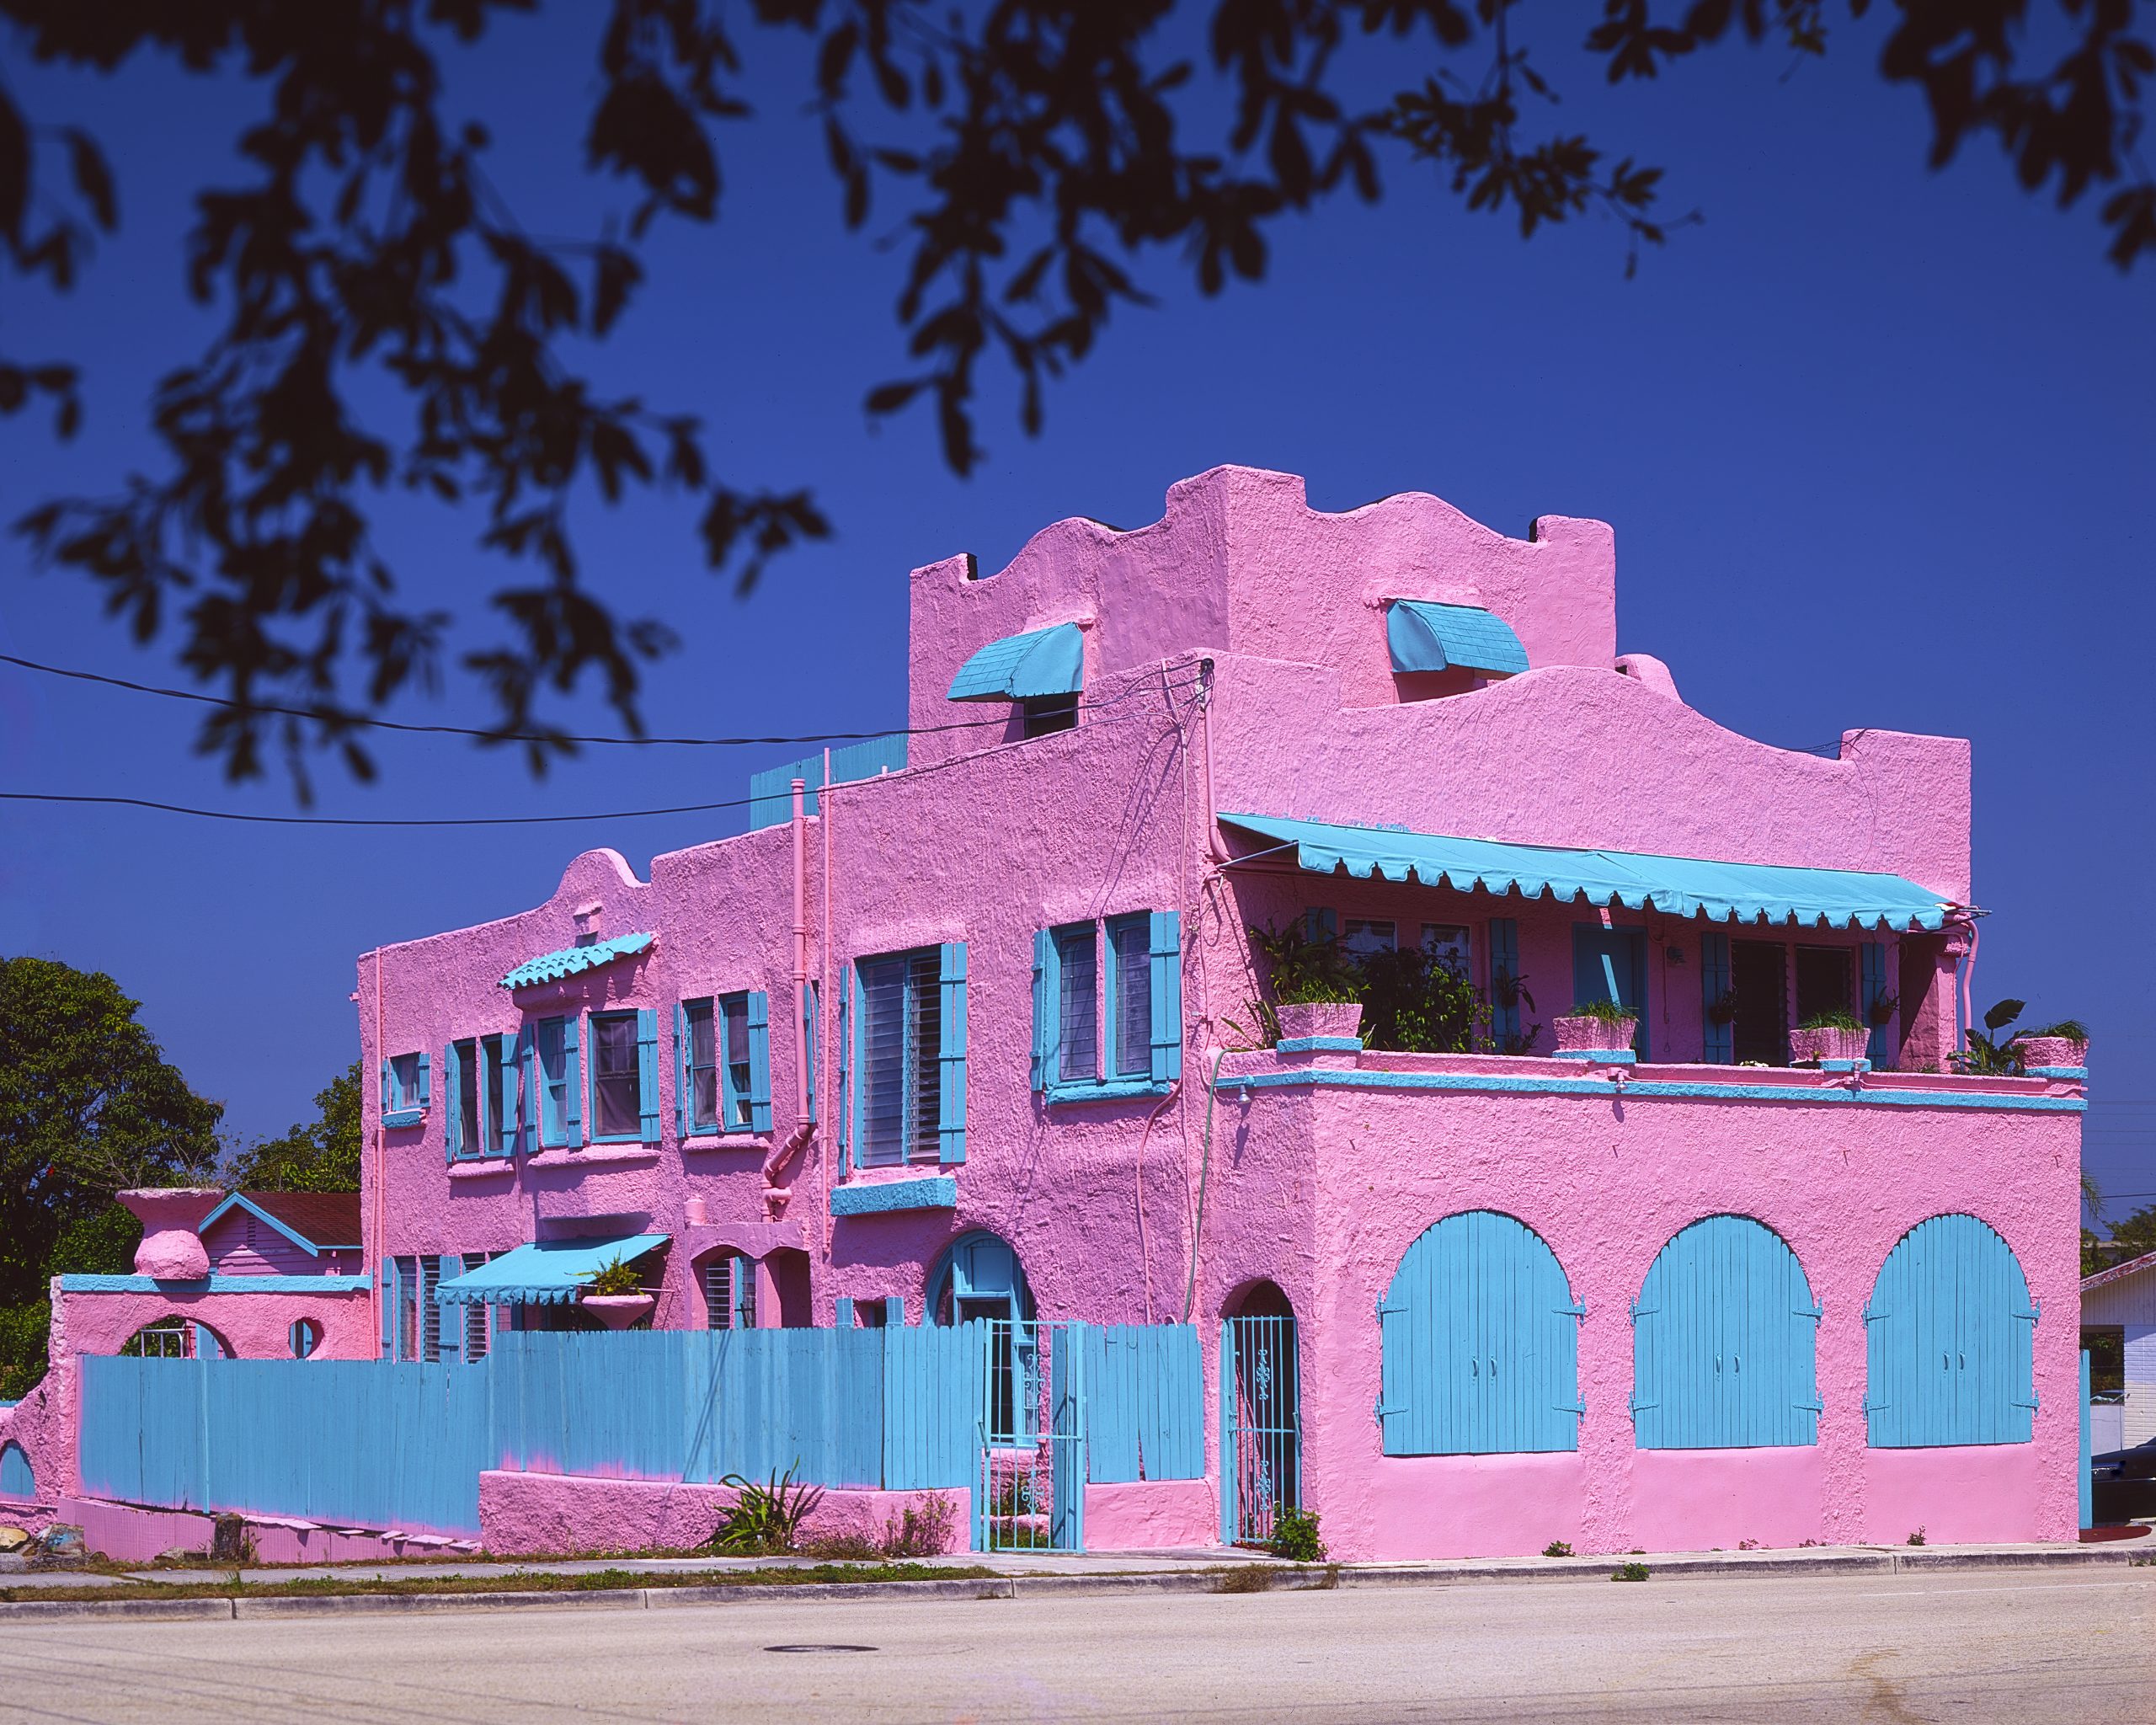 Pink and teal building - West Palm Beach, Florida. Captured on Film